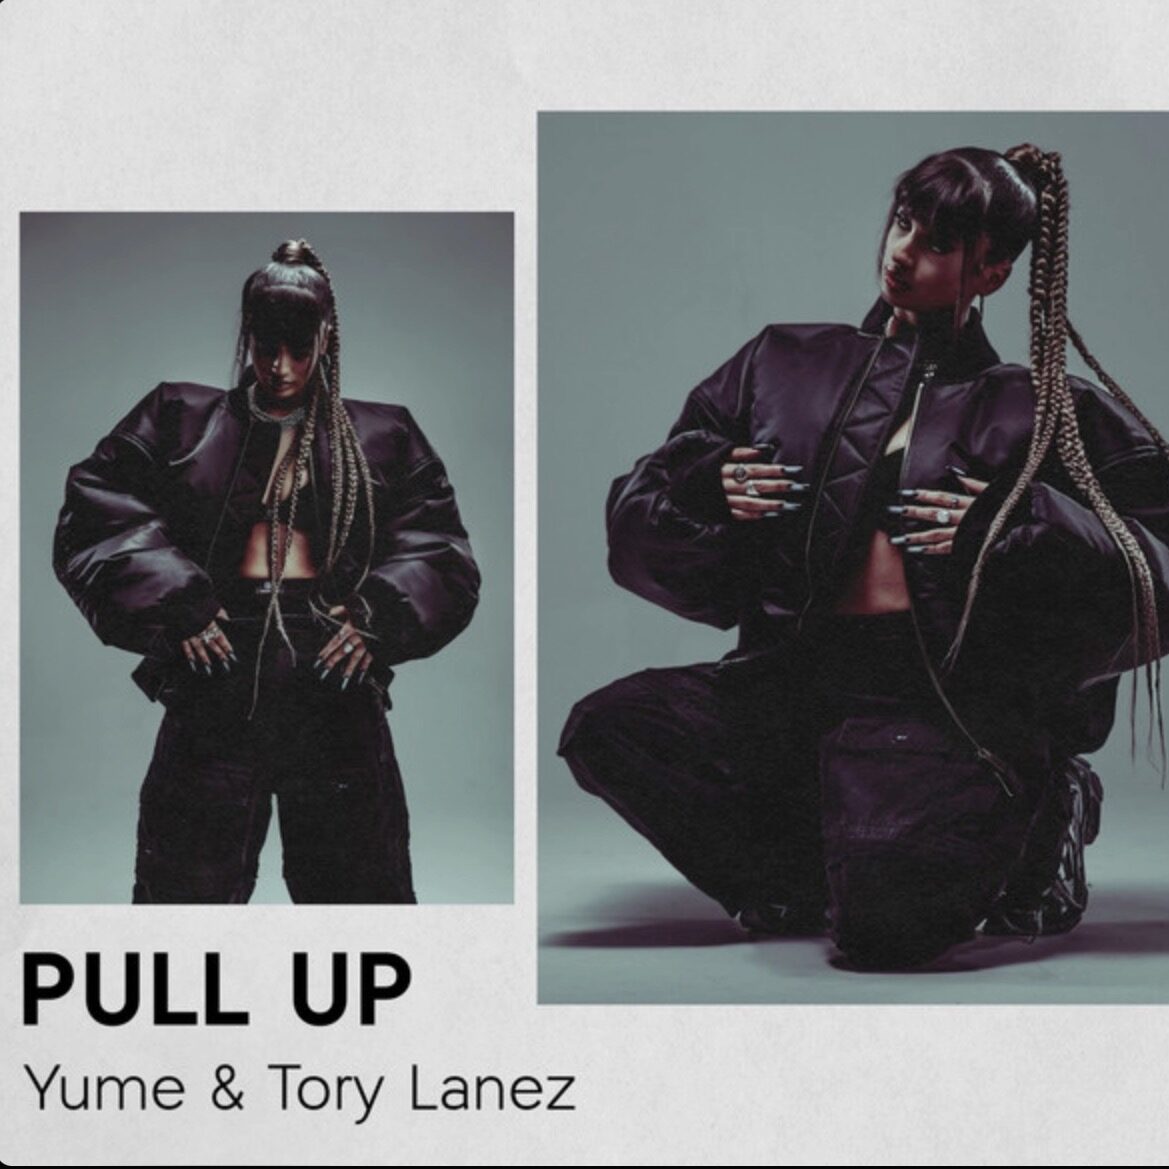 YUME’s Star Continues To Shine Bright On “Pull Up” With Tory Lanez